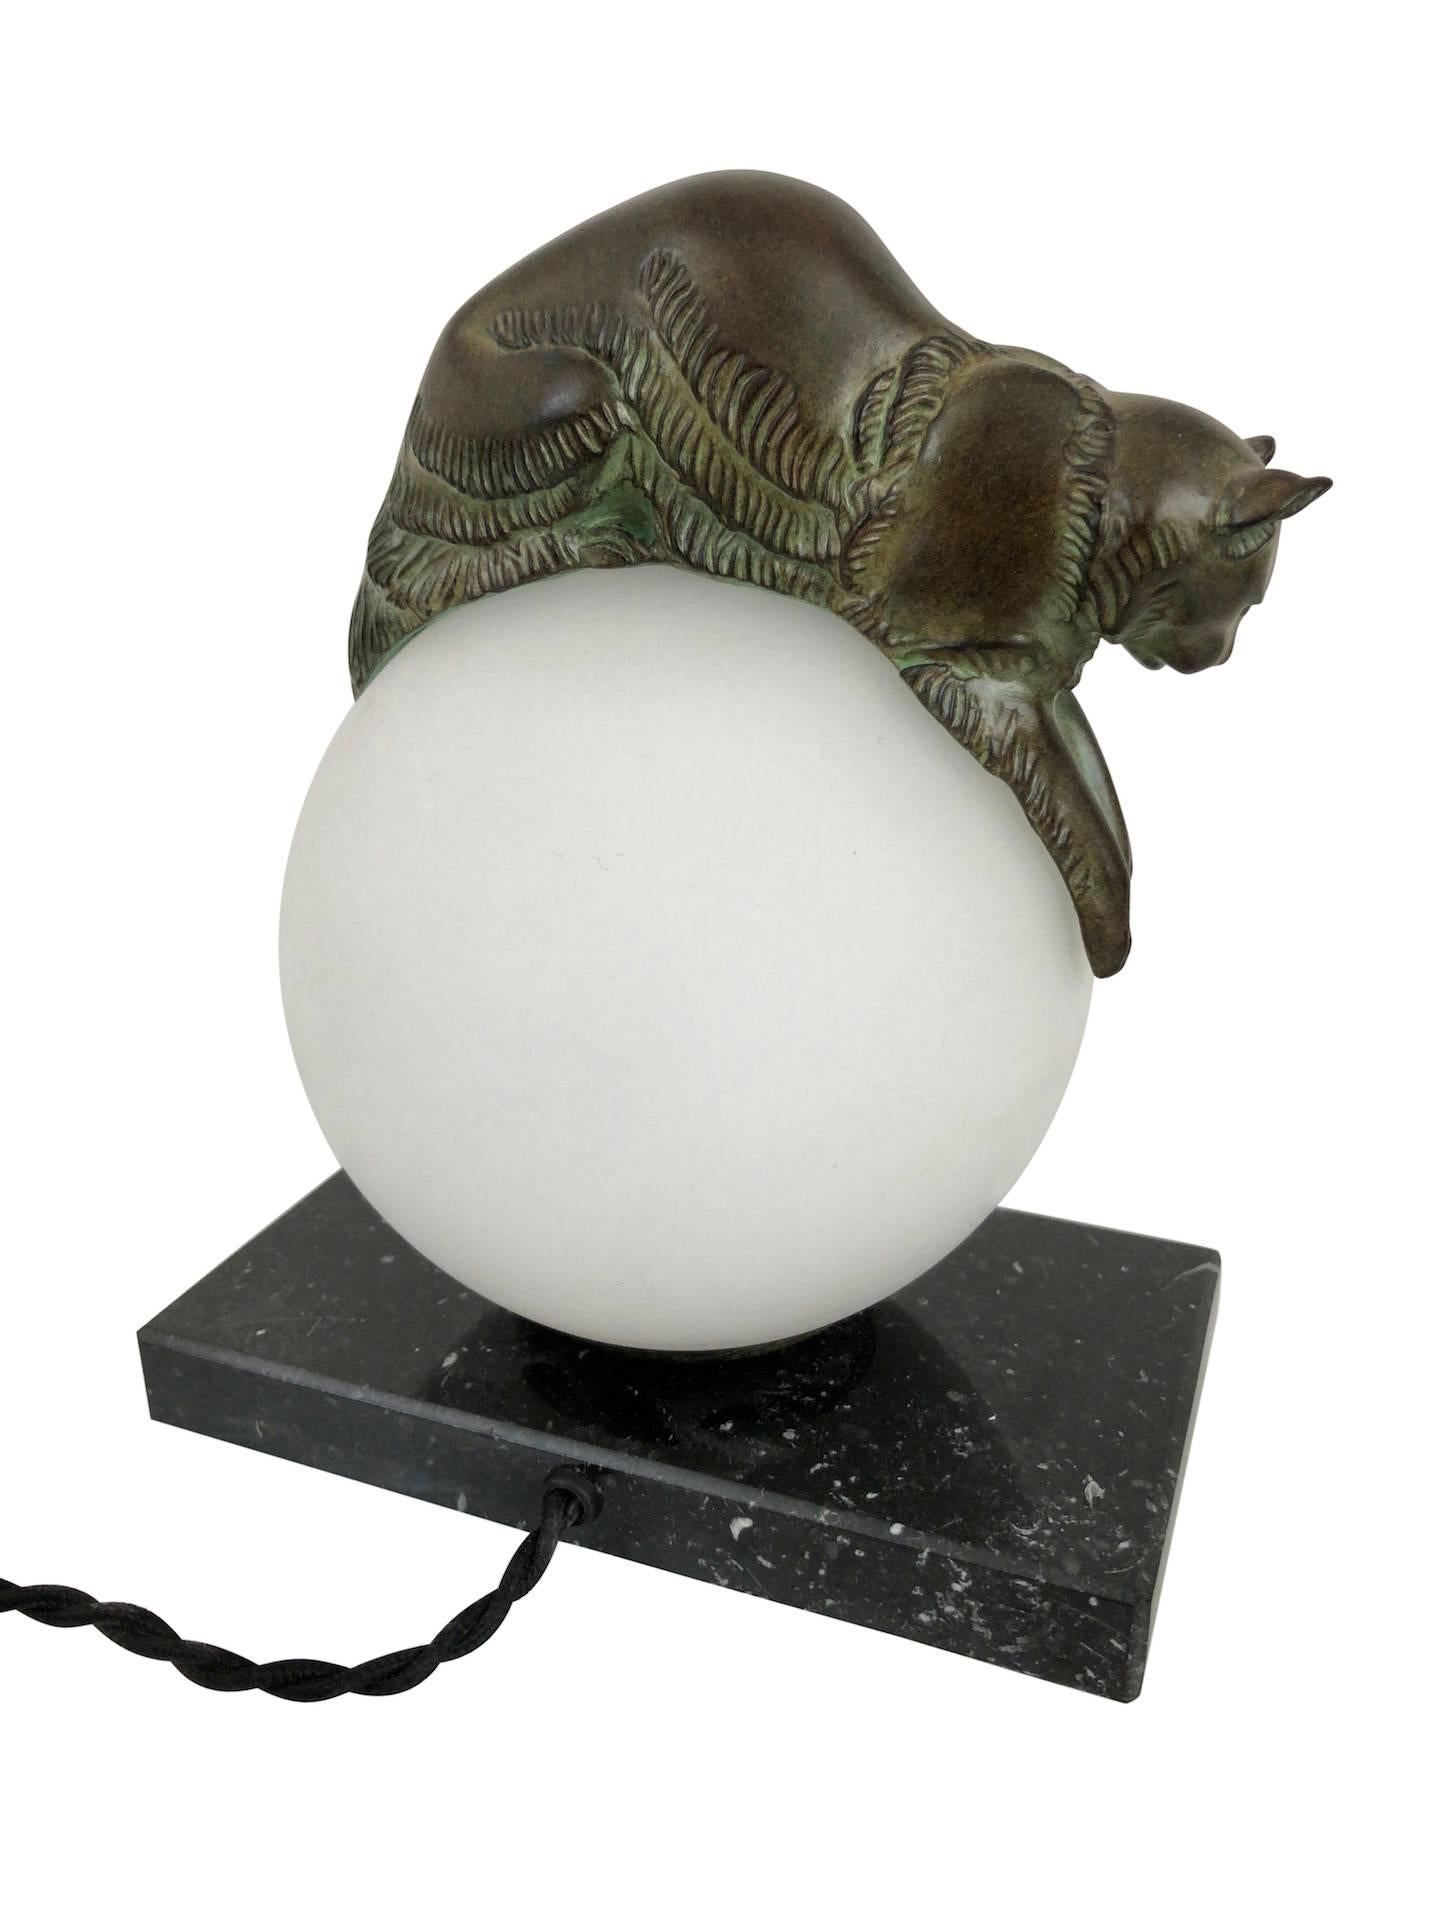 Patinated French Table Lamp Equilibre a Cat on a Glass Ball by Gaillard for Max Le Verrier